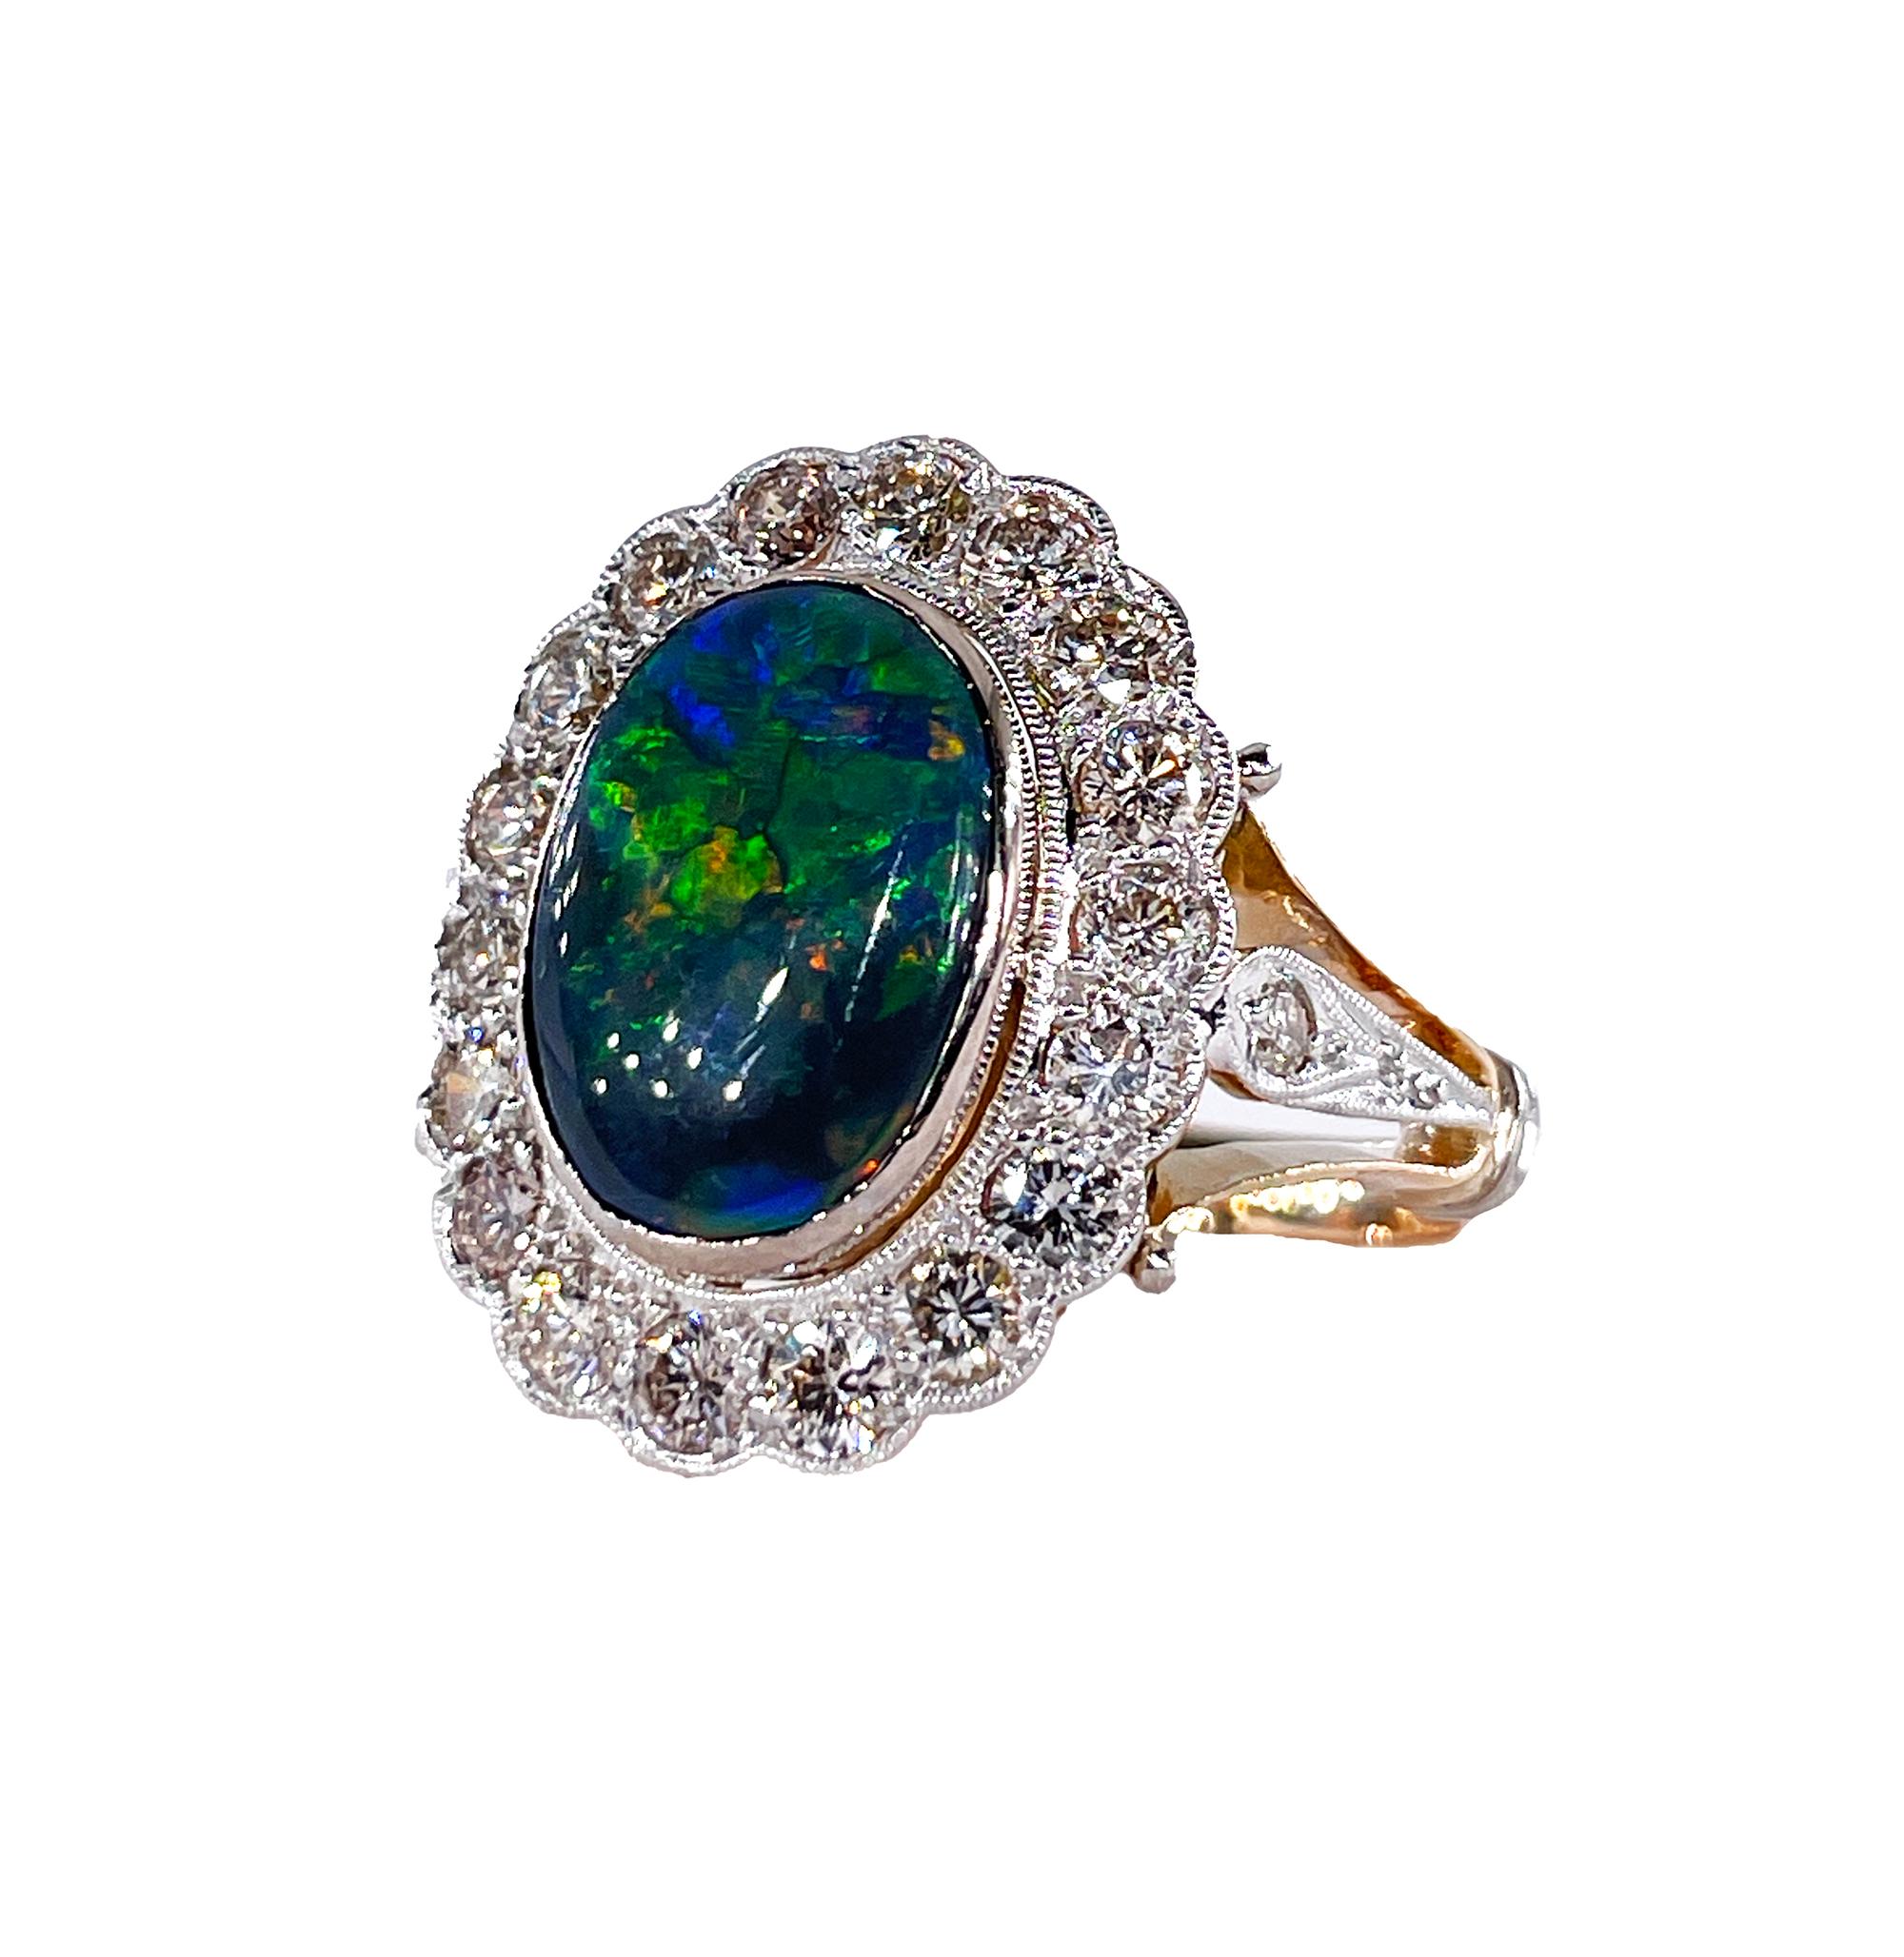 A Beautiful Art Deco Black Australian Opal and Diamond Cluster Flower shaped Ring in 18K Gold

Highly prized and sought after by kings, emperors, maharajas and sultans, the majestic Opal has been desired throughout the ages. From our estate